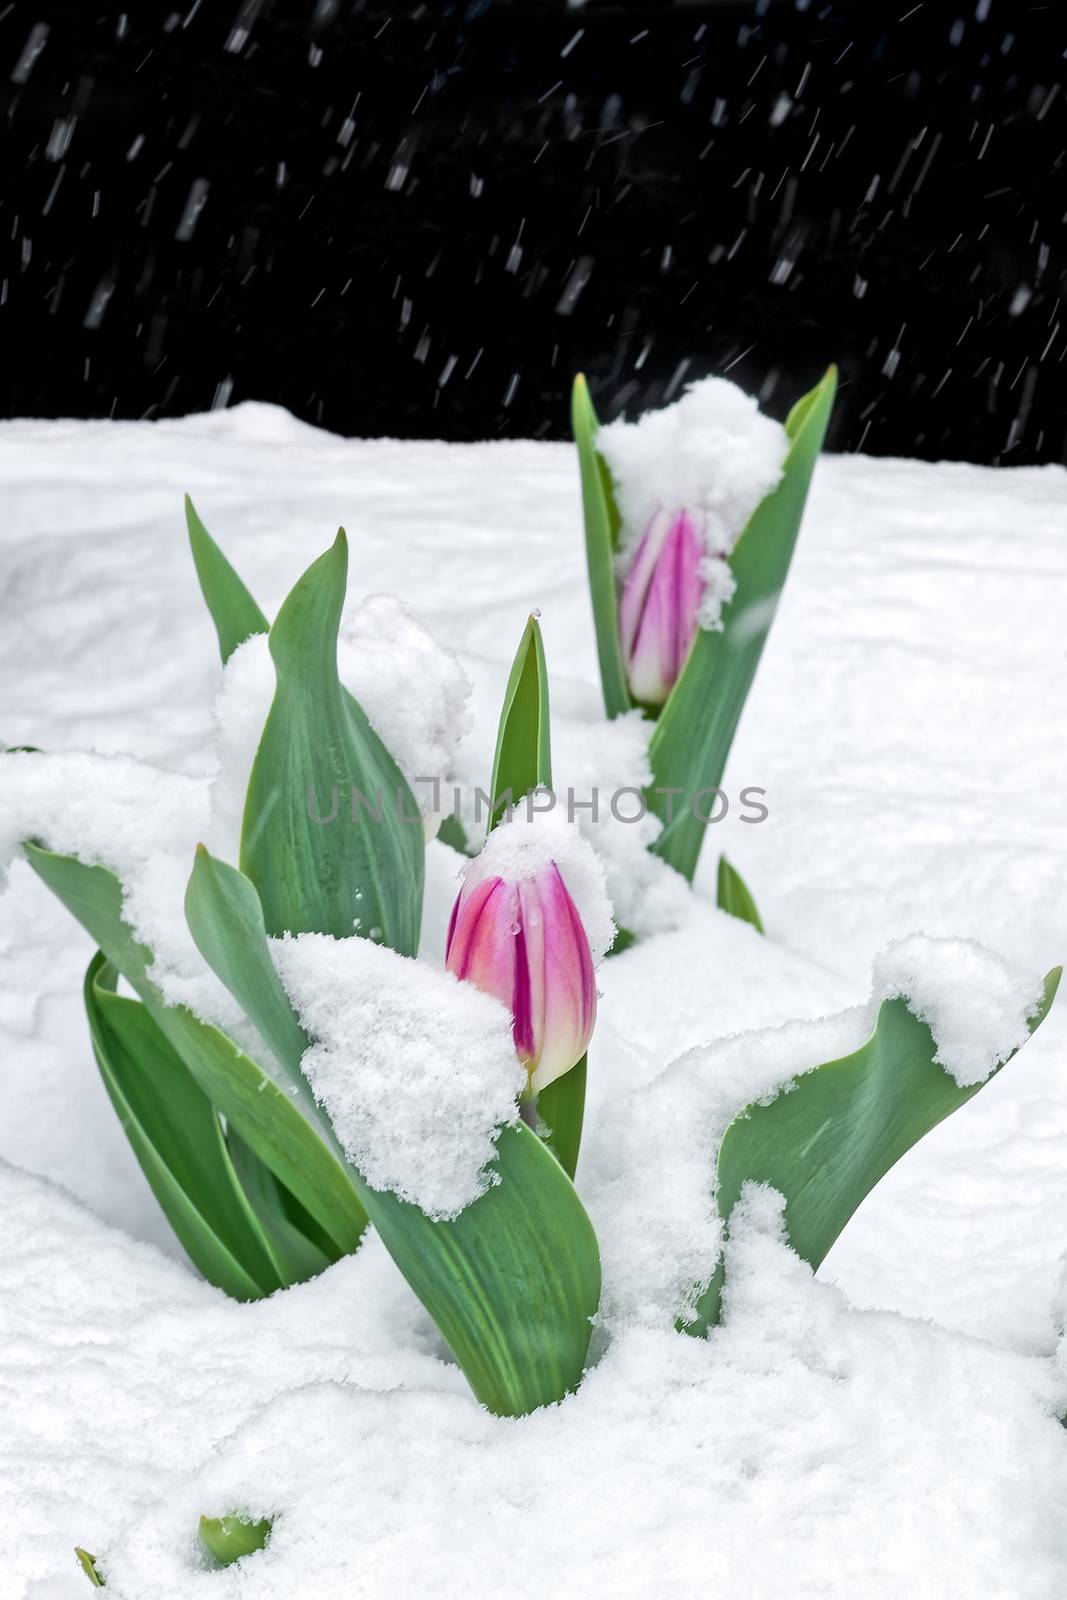 Tulips in the Snow by DelmasLehman